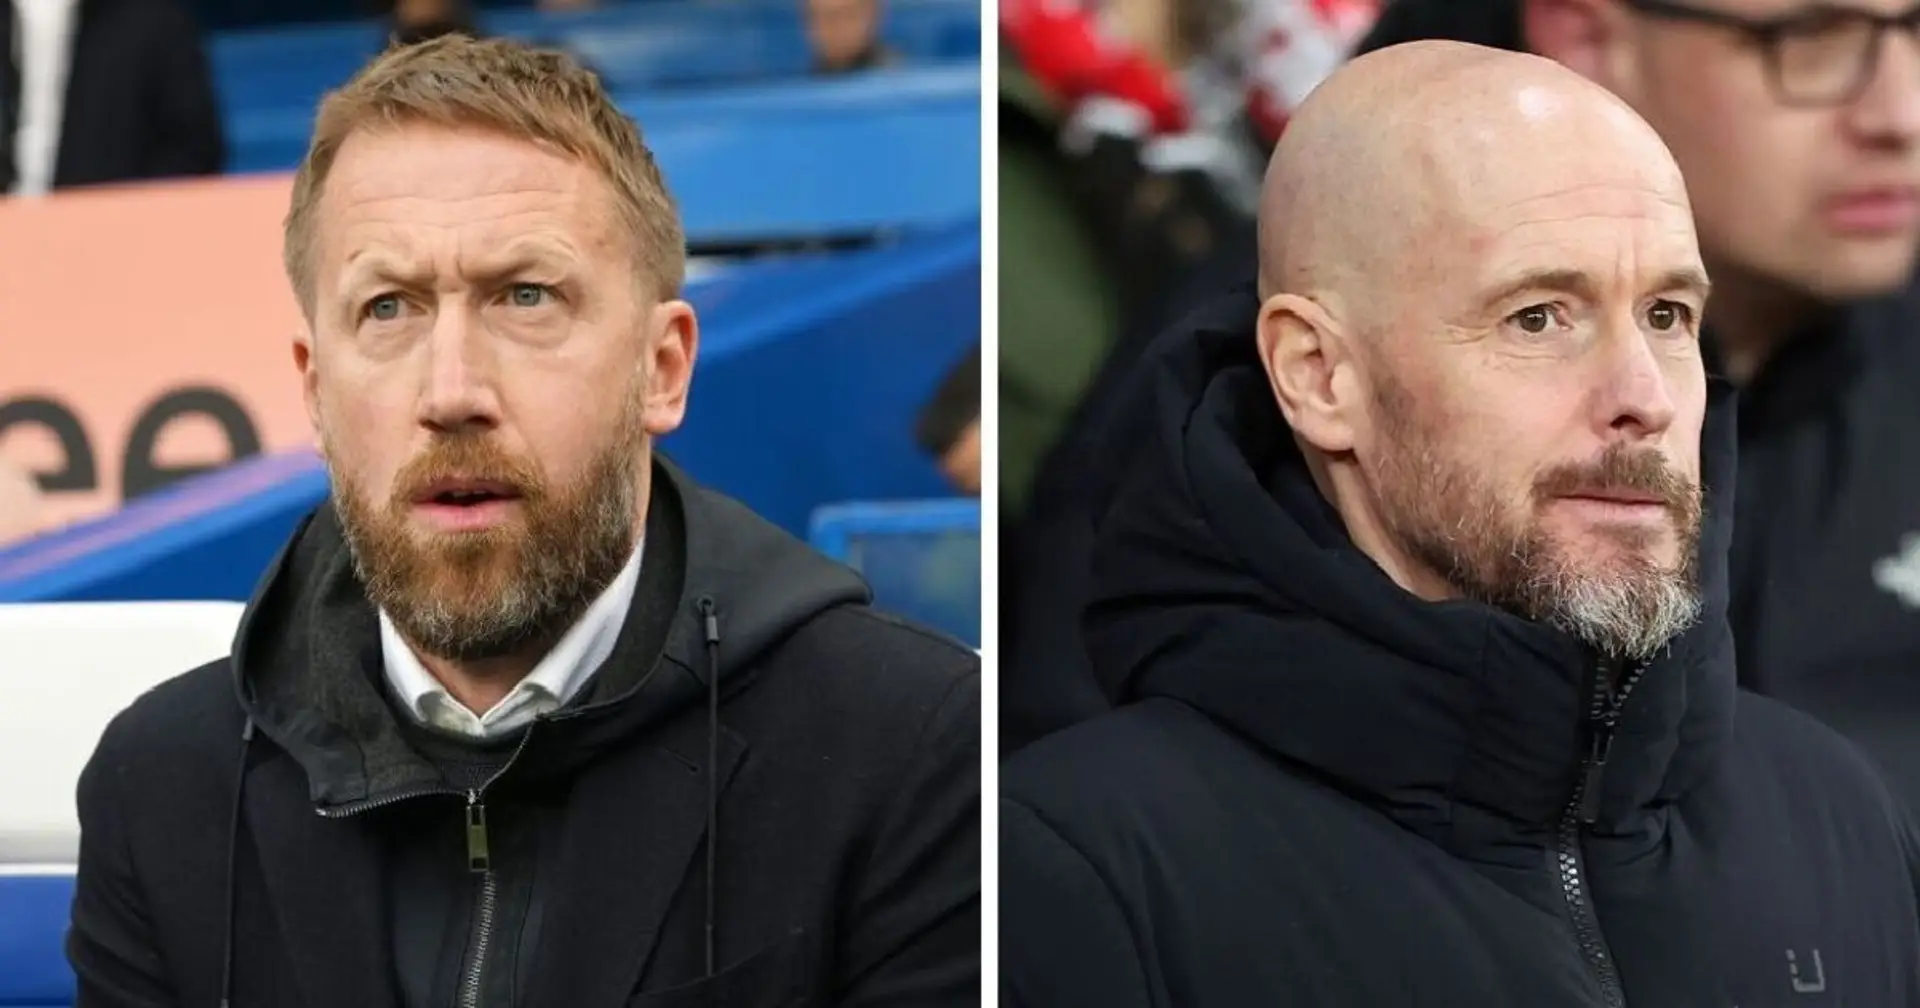 Ten Hag speaks about sack reports & 2 more big Man United stories you might've missed